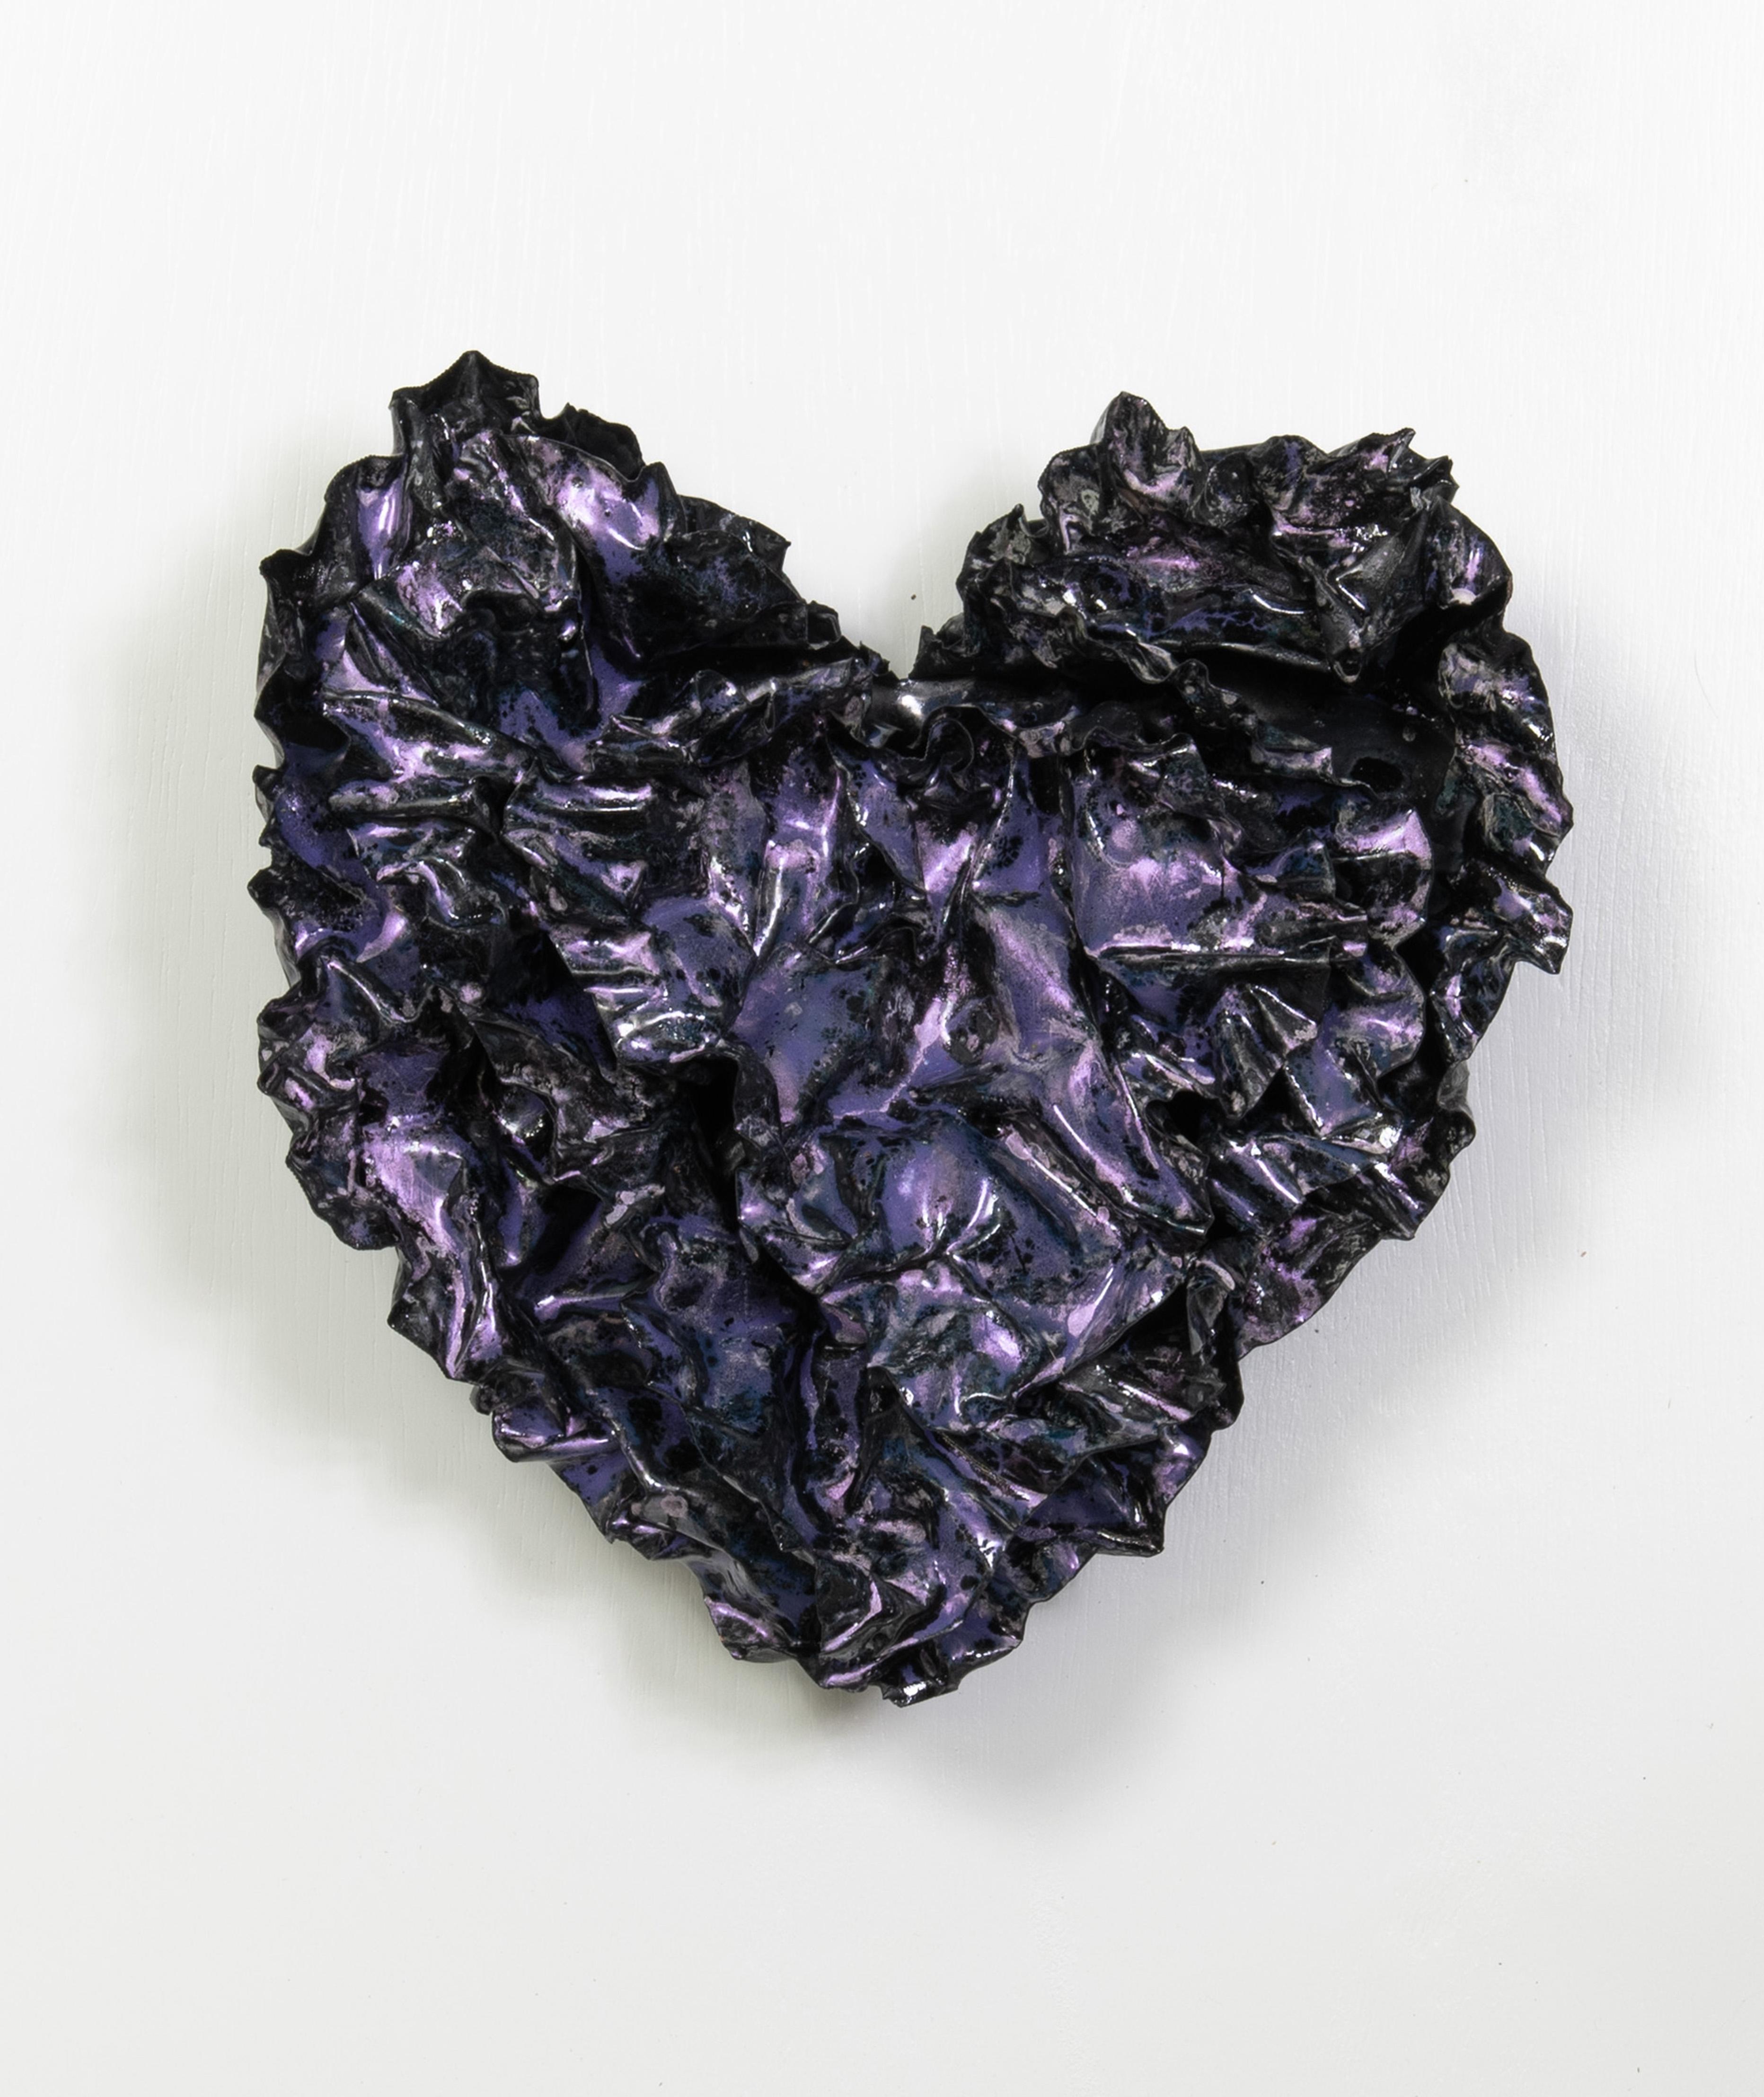 The final luminescent coat of this shimmering heart was fired very briefly at a lower temperature, allowing the luminescent finish to sit on top of the purple base and create a lustrous finish to the sculpture.